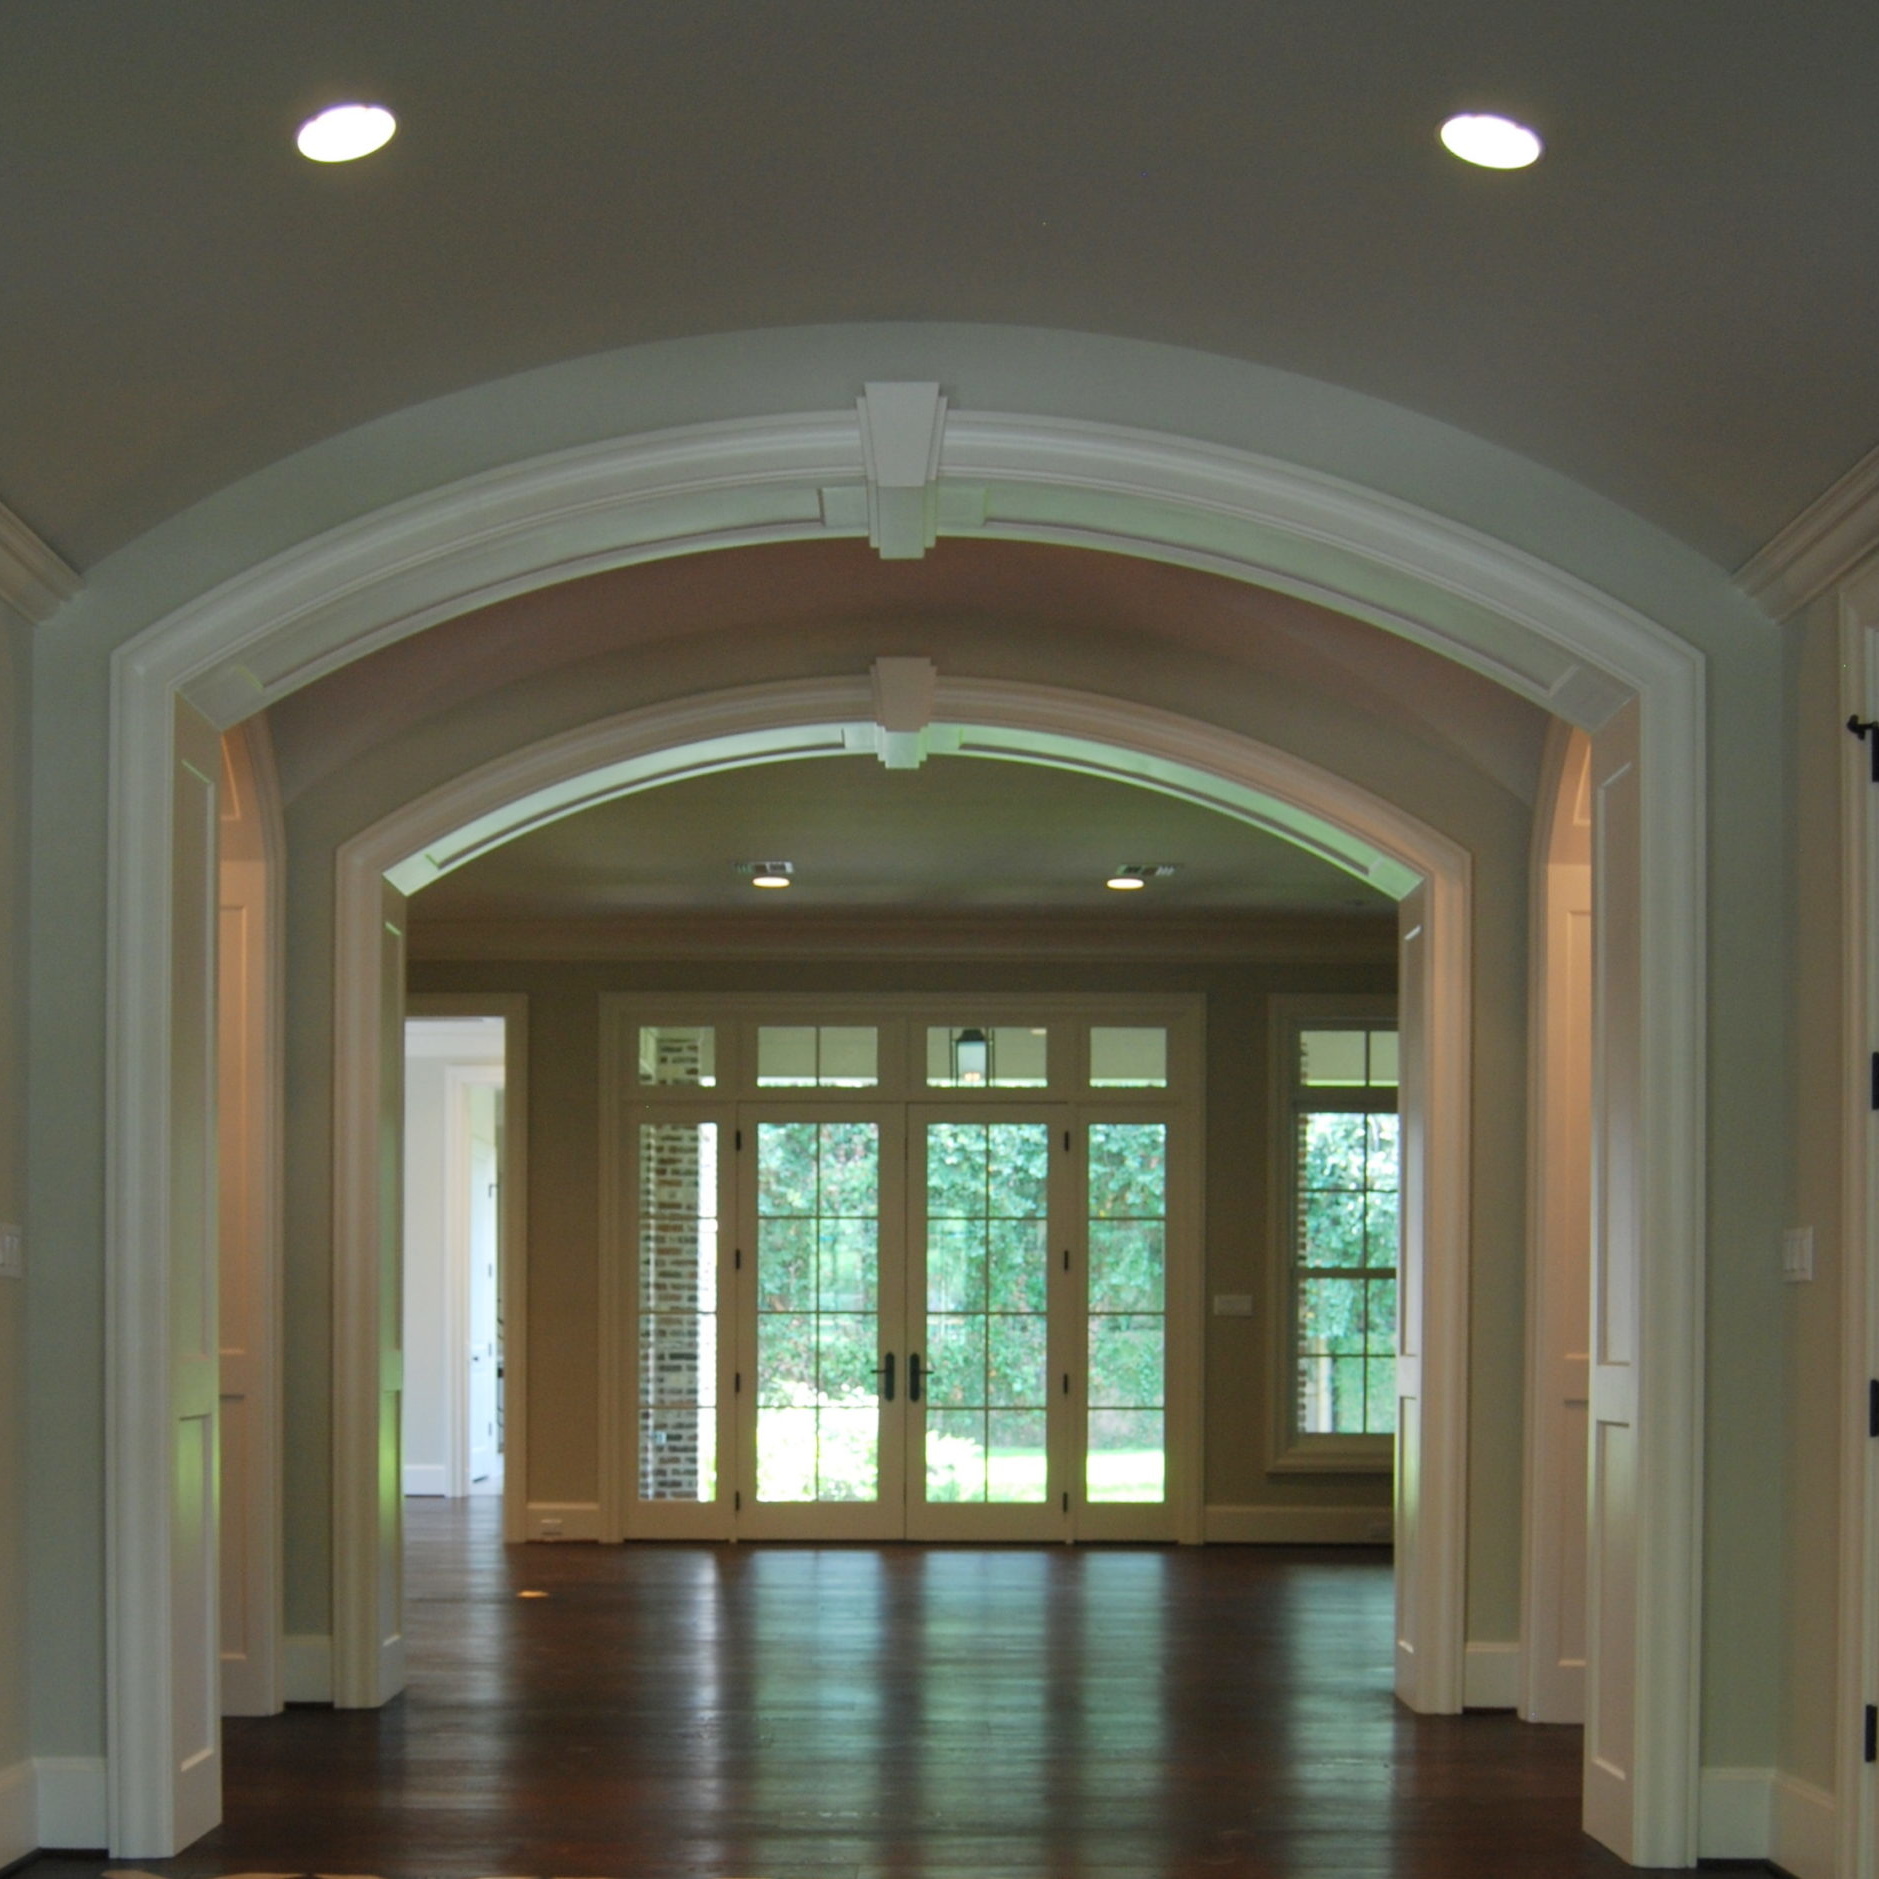 Entryway architecture